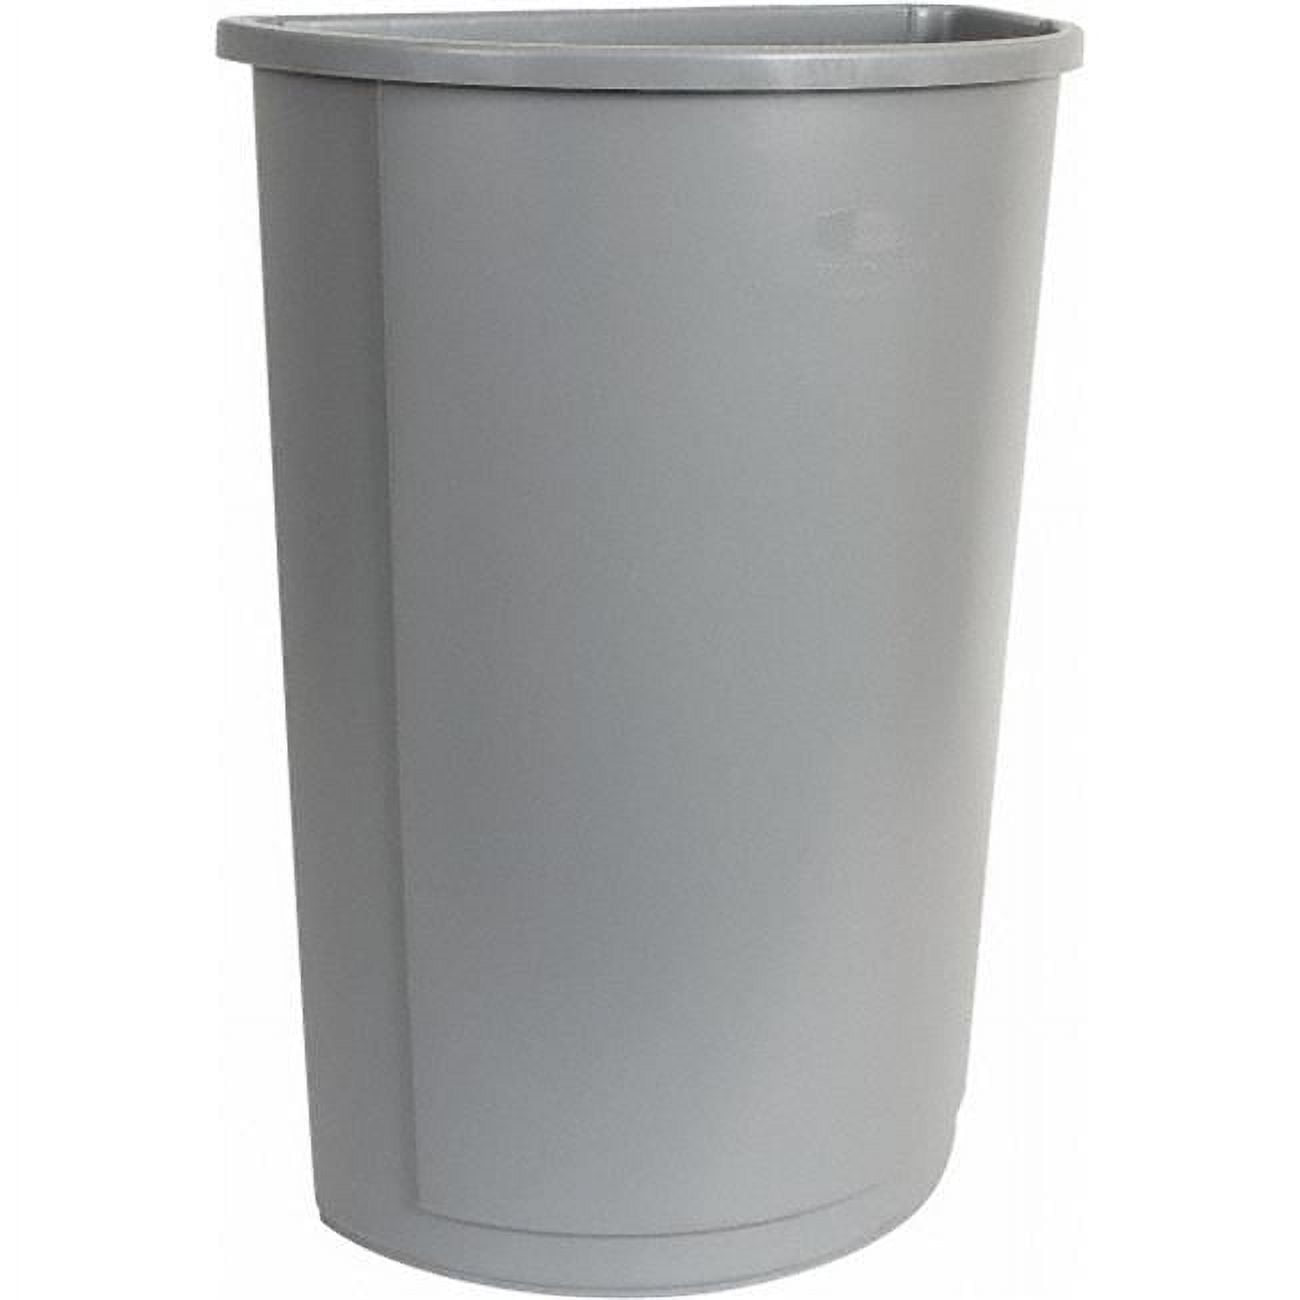 Lidded Garbage Cans